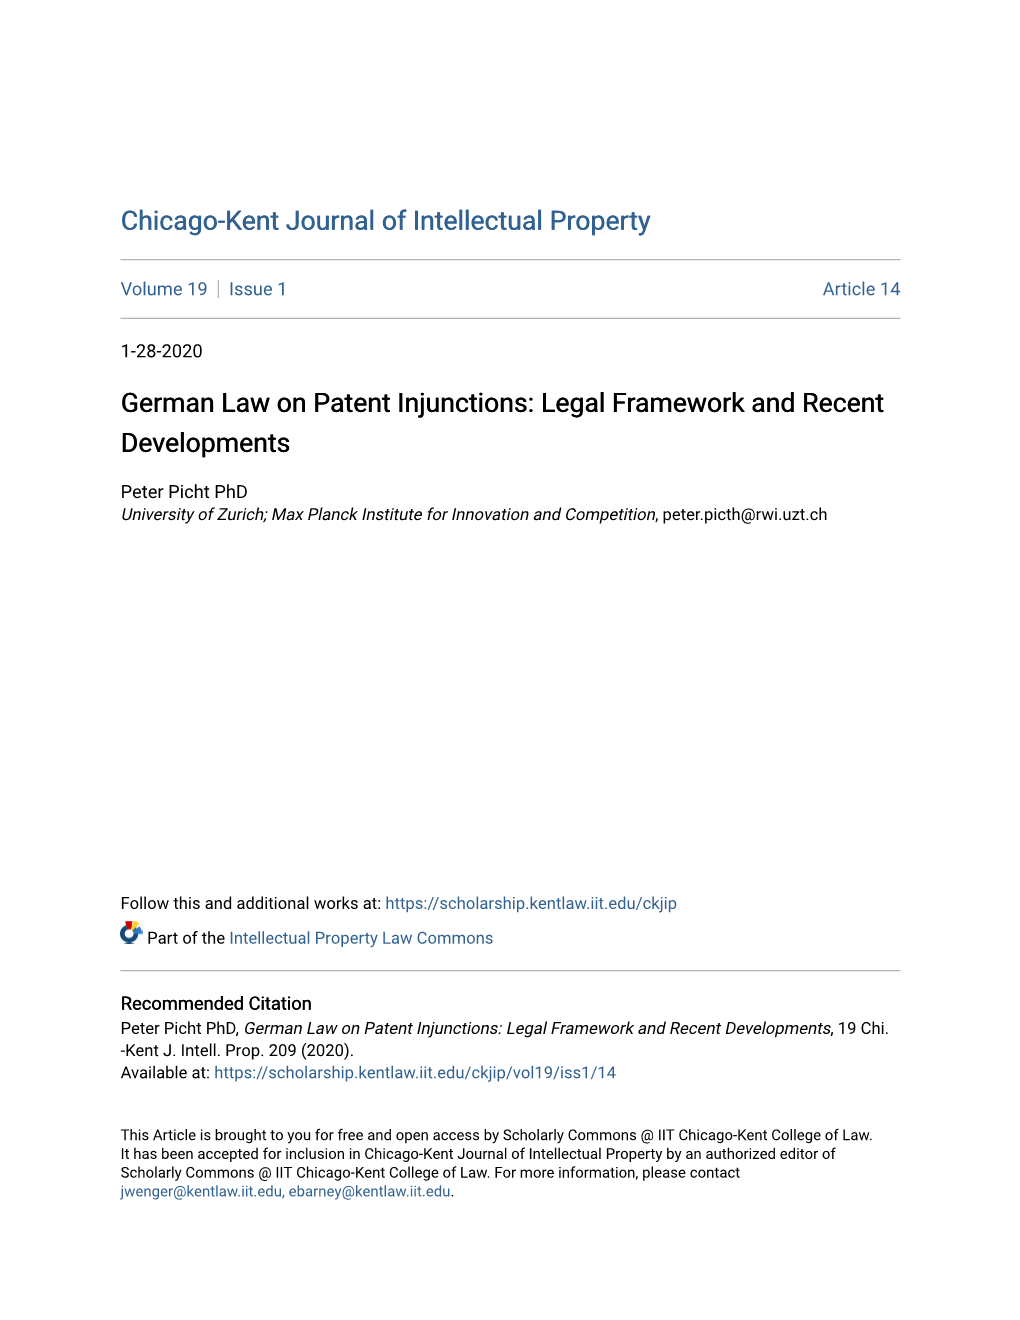 German Law on Patent Injunctions: Legal Framework and Recent Developments